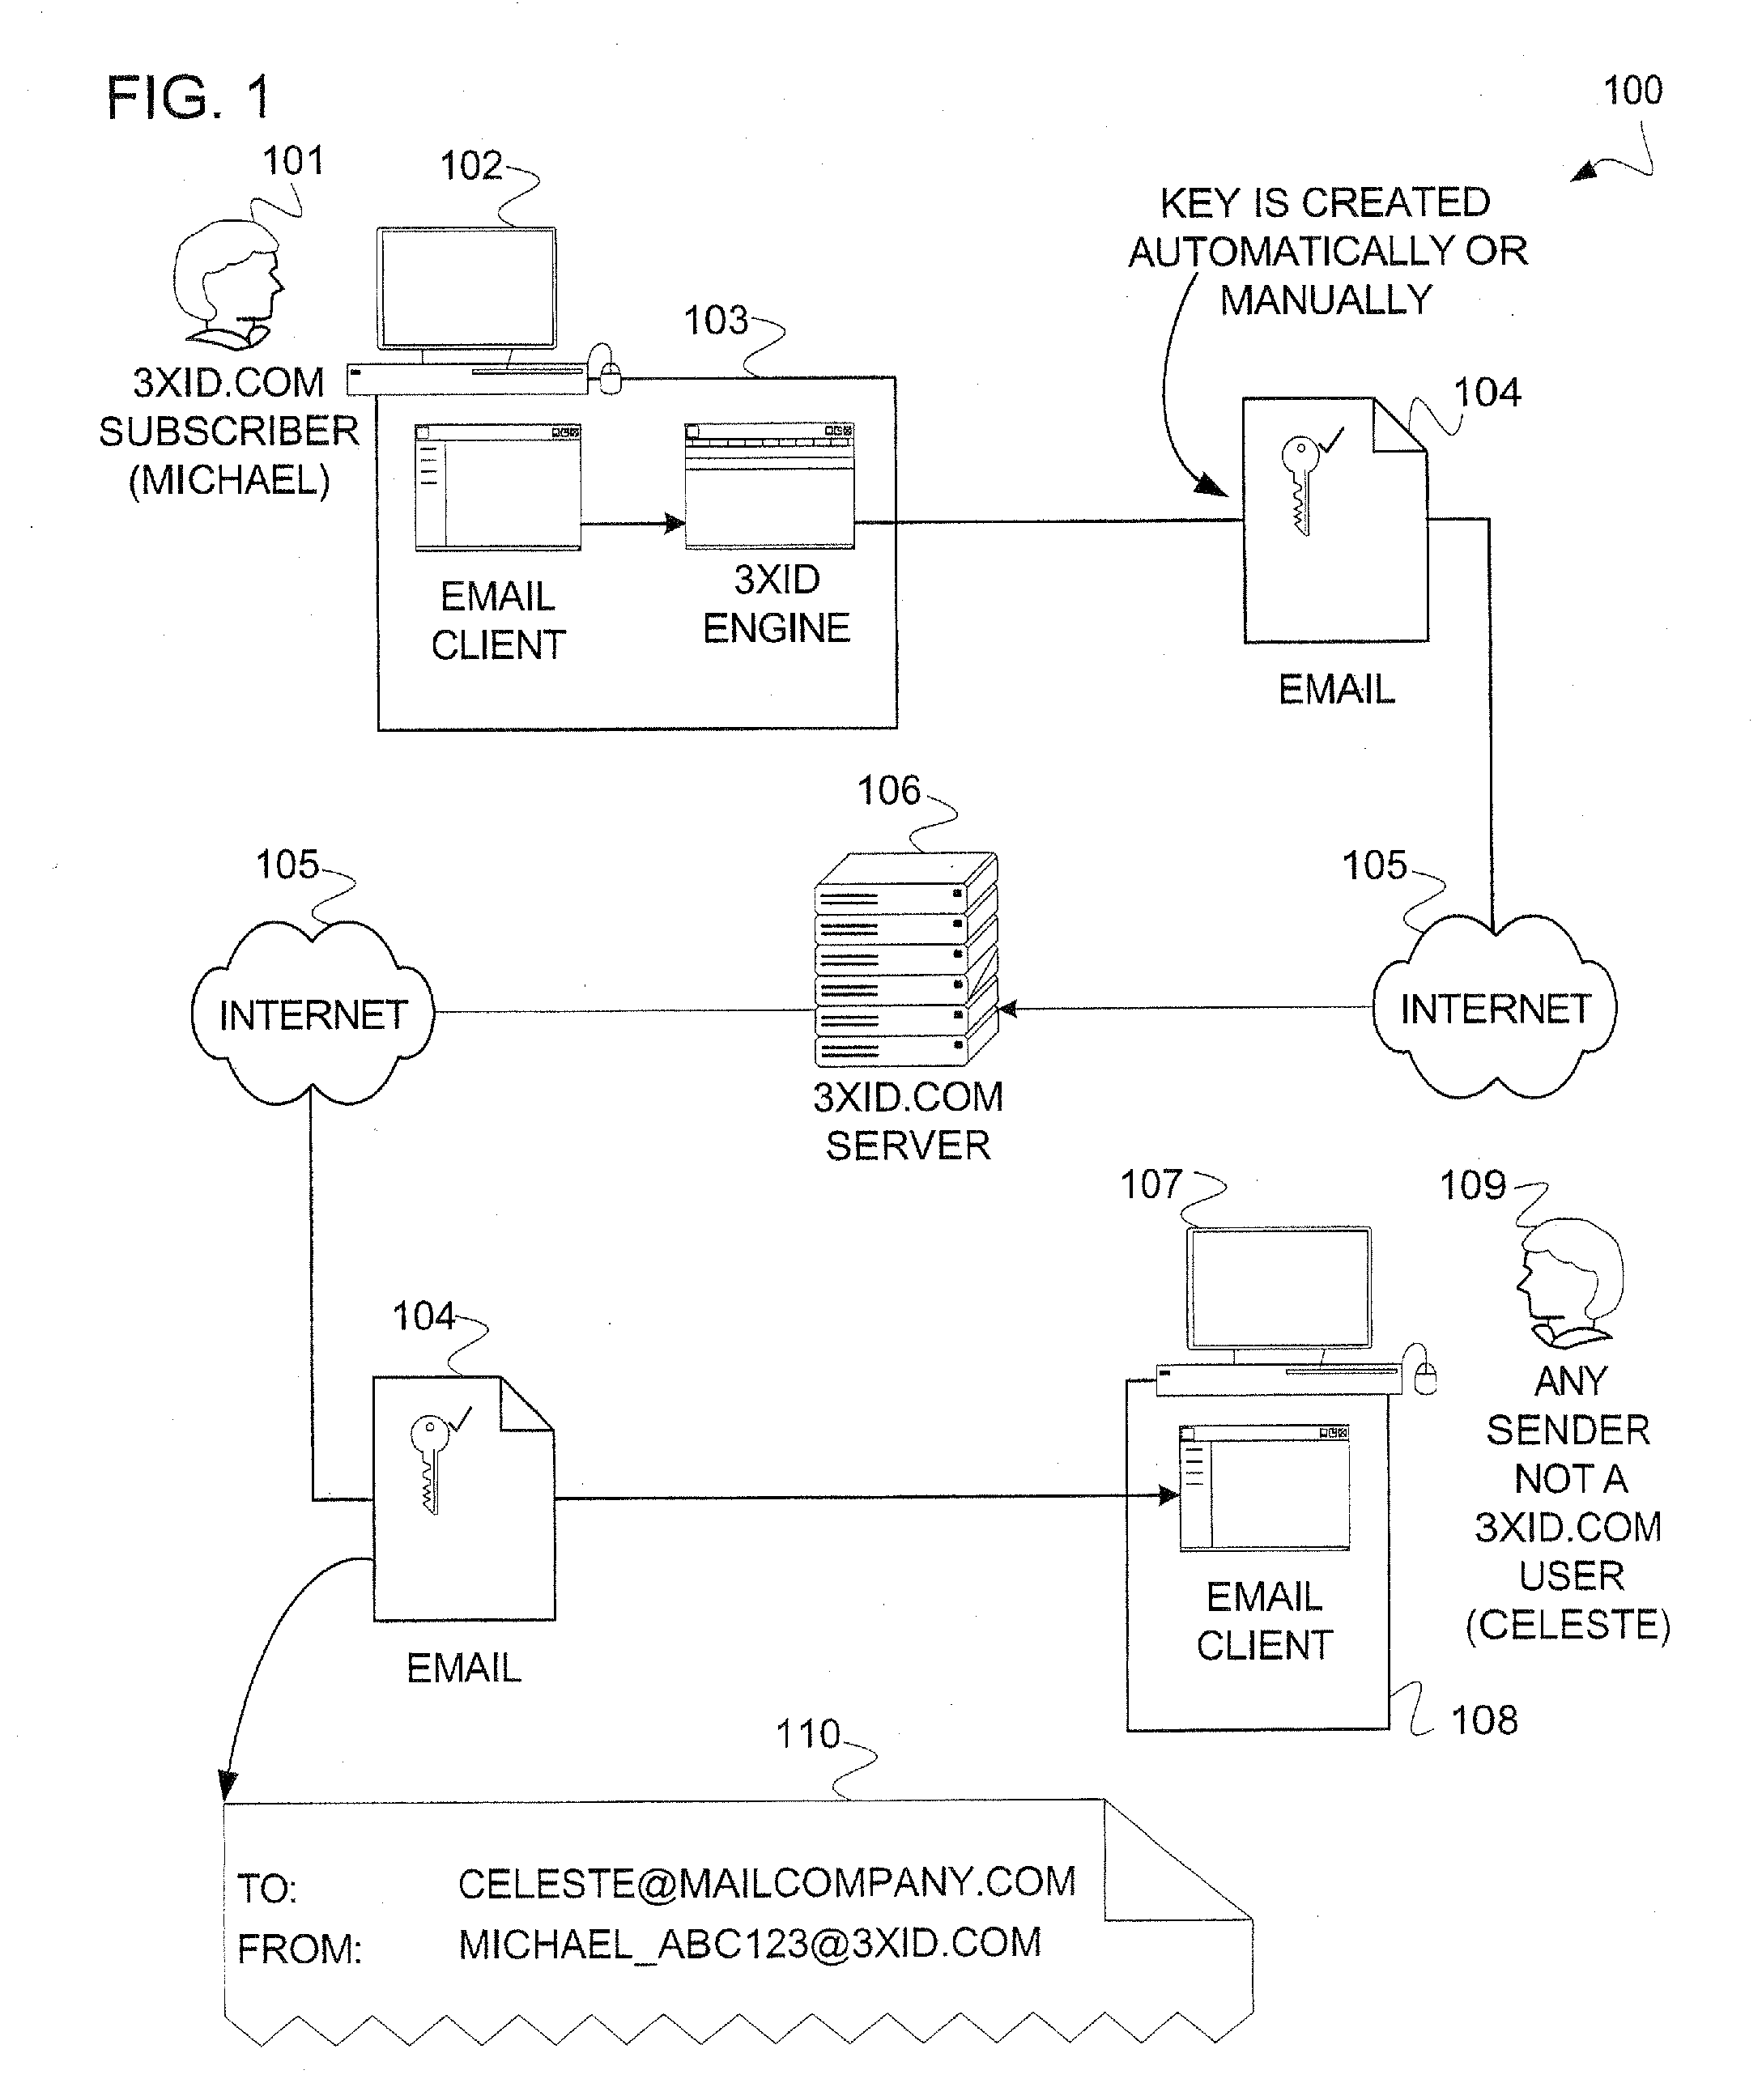 System and method for verifying the identity of a sender of electronic mail and preventing unsolicited bulk email